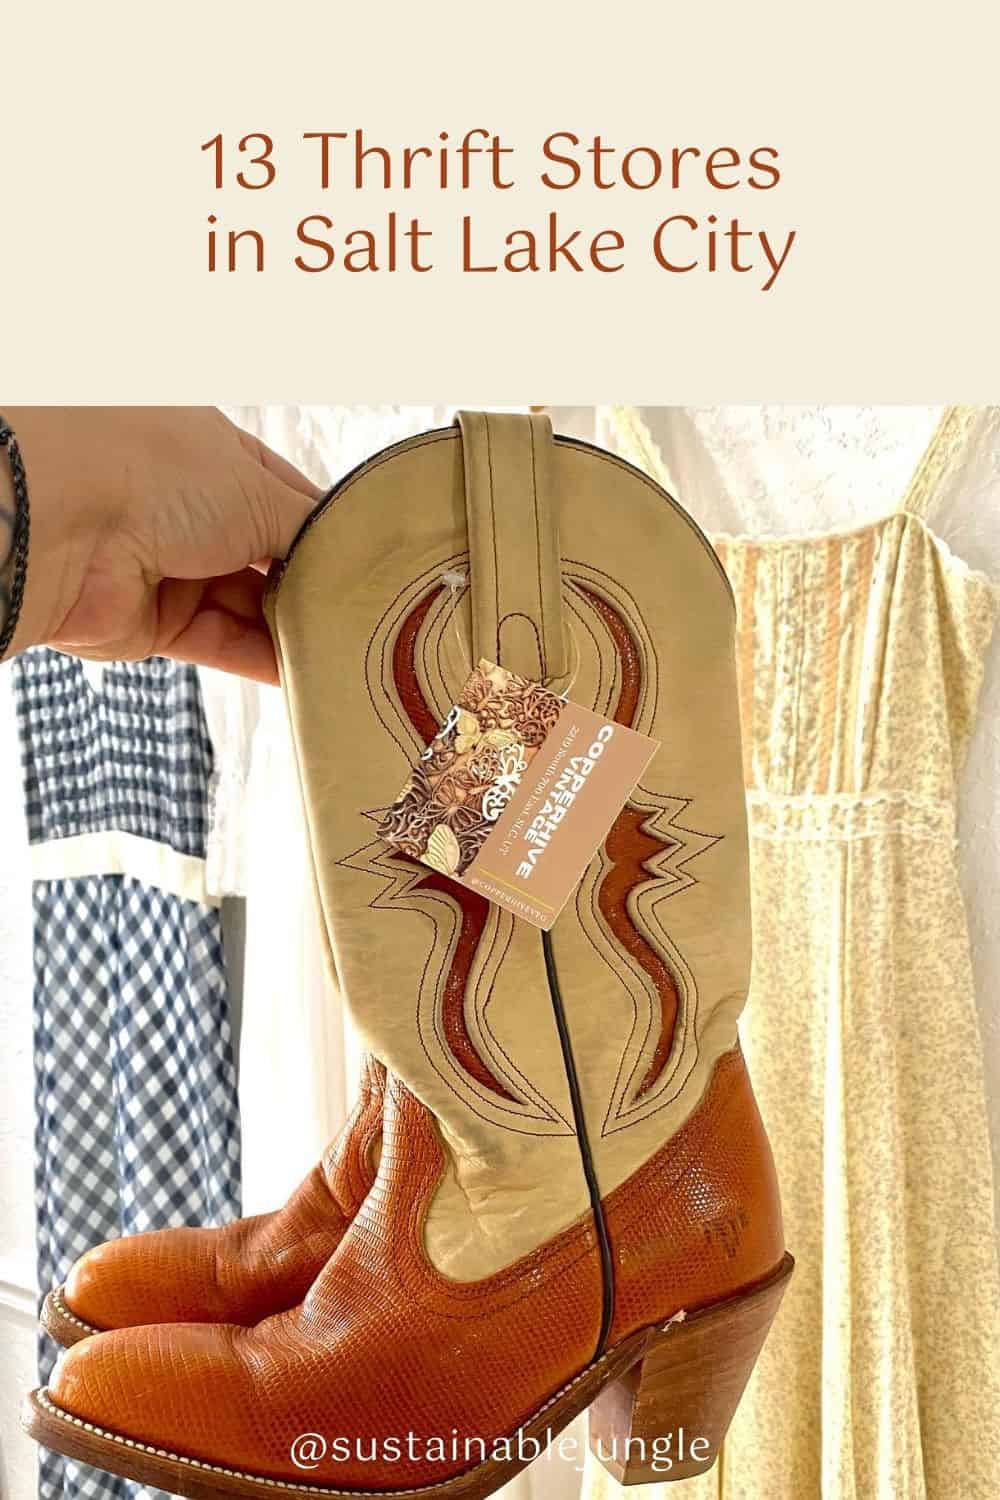 13 Thrift Stores in Salt Lake City at the (Consignment) Crossroads of the West Image by Copperhive Vintage #thriftstoressaltlakecity #thriftstoresSLC #SLCthriftstorse #bestthriftstoresinsaltlakecity #saltlakecitythriftstores #sustainablejungle